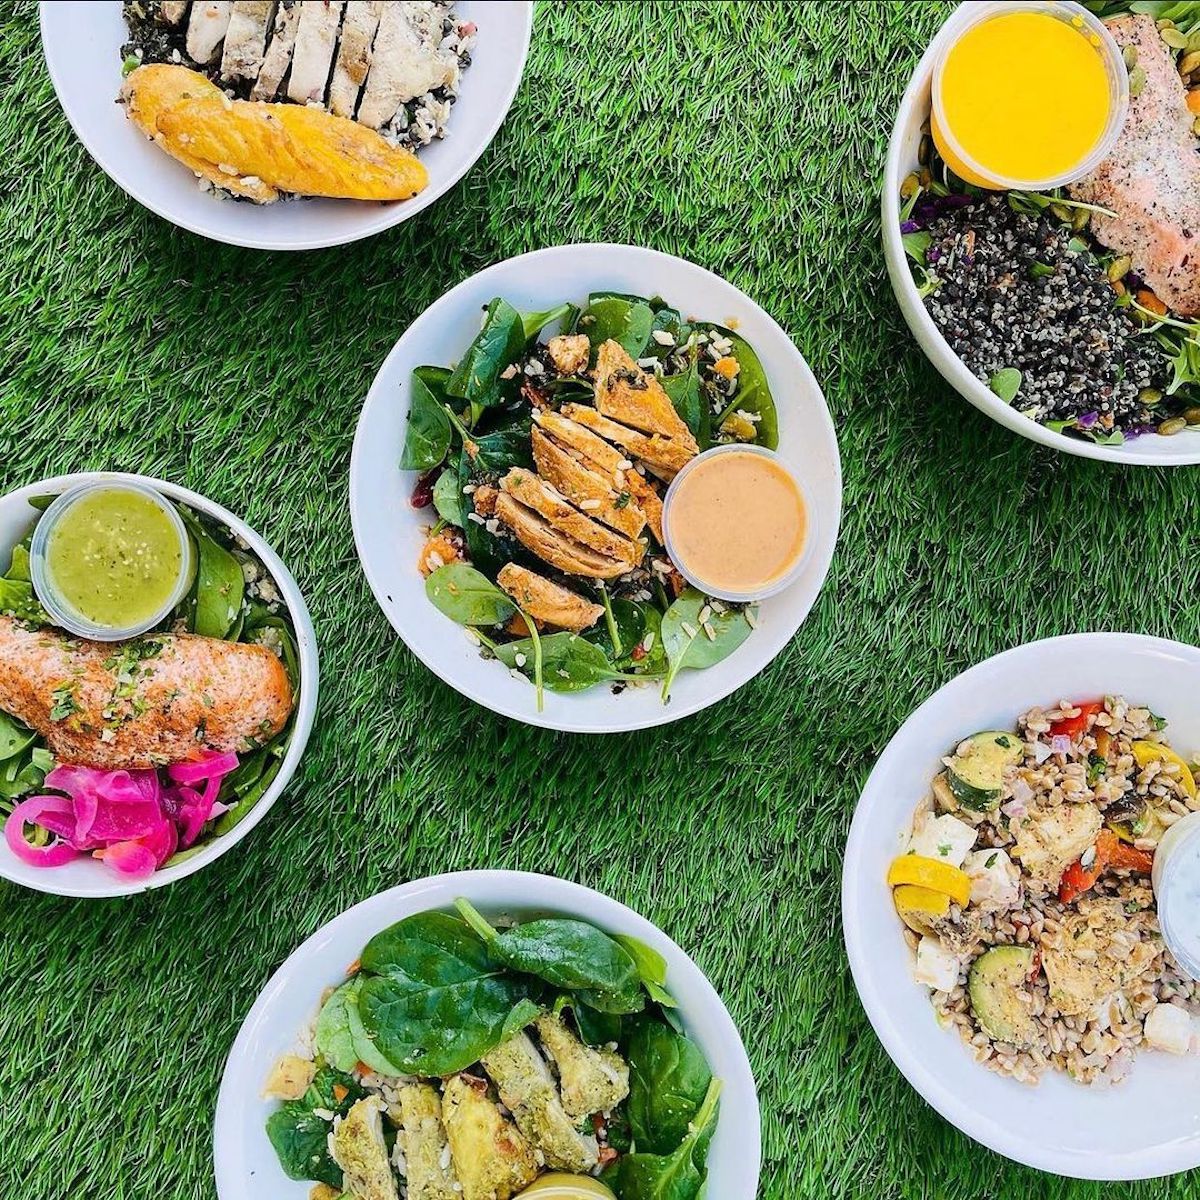 Everytable to Open Grab-and-go Storefronts in San Diego